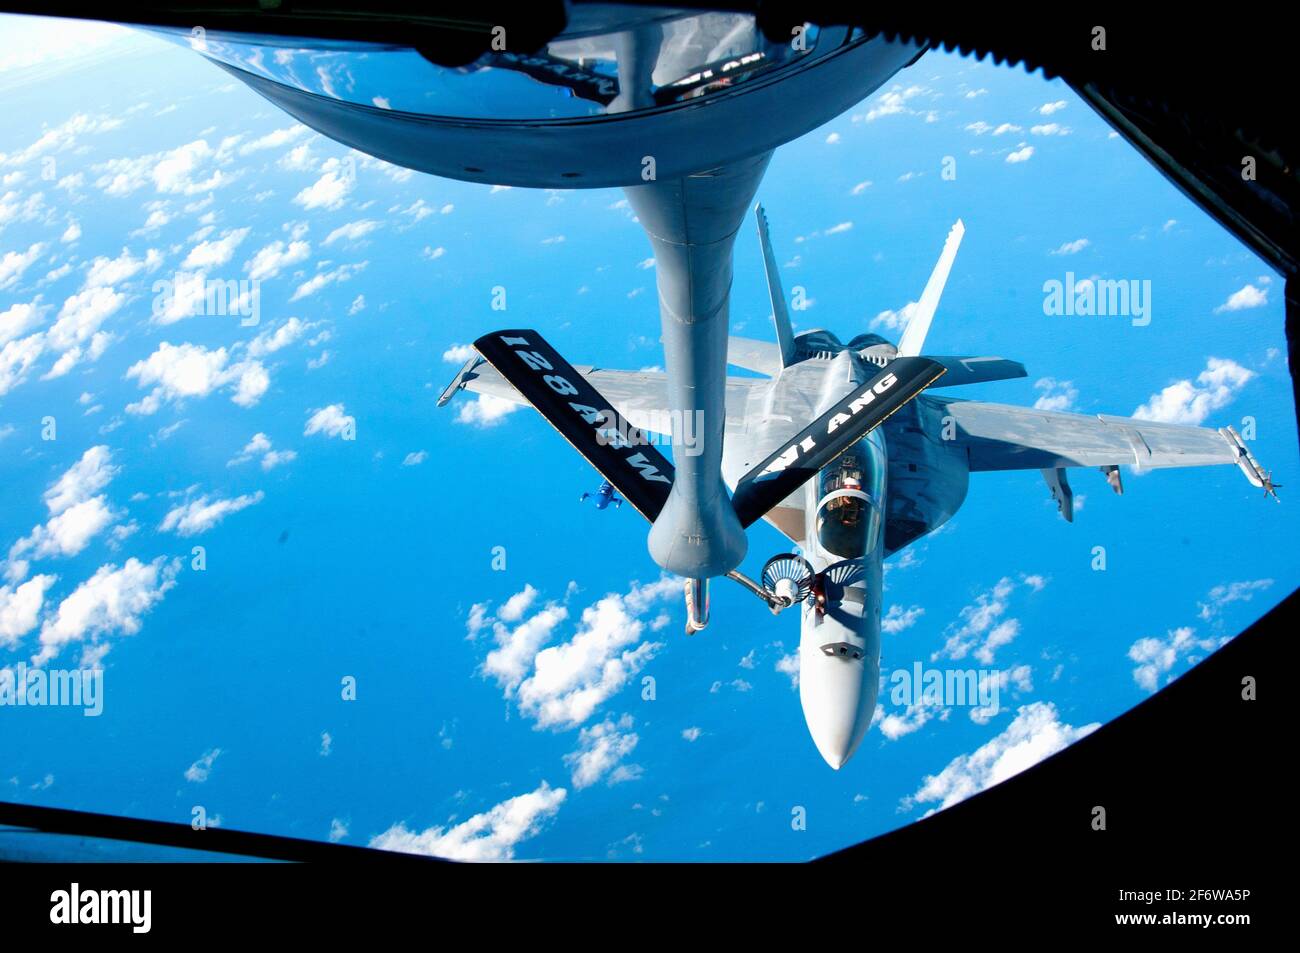 PACIFIC OCEAN (Dec. 12, 2018) An F/A-18 Hornet conducts air refueling operations, Dec. 12, 2018, over the Pacific Ocean as part of a routine Sentry Stock Photo